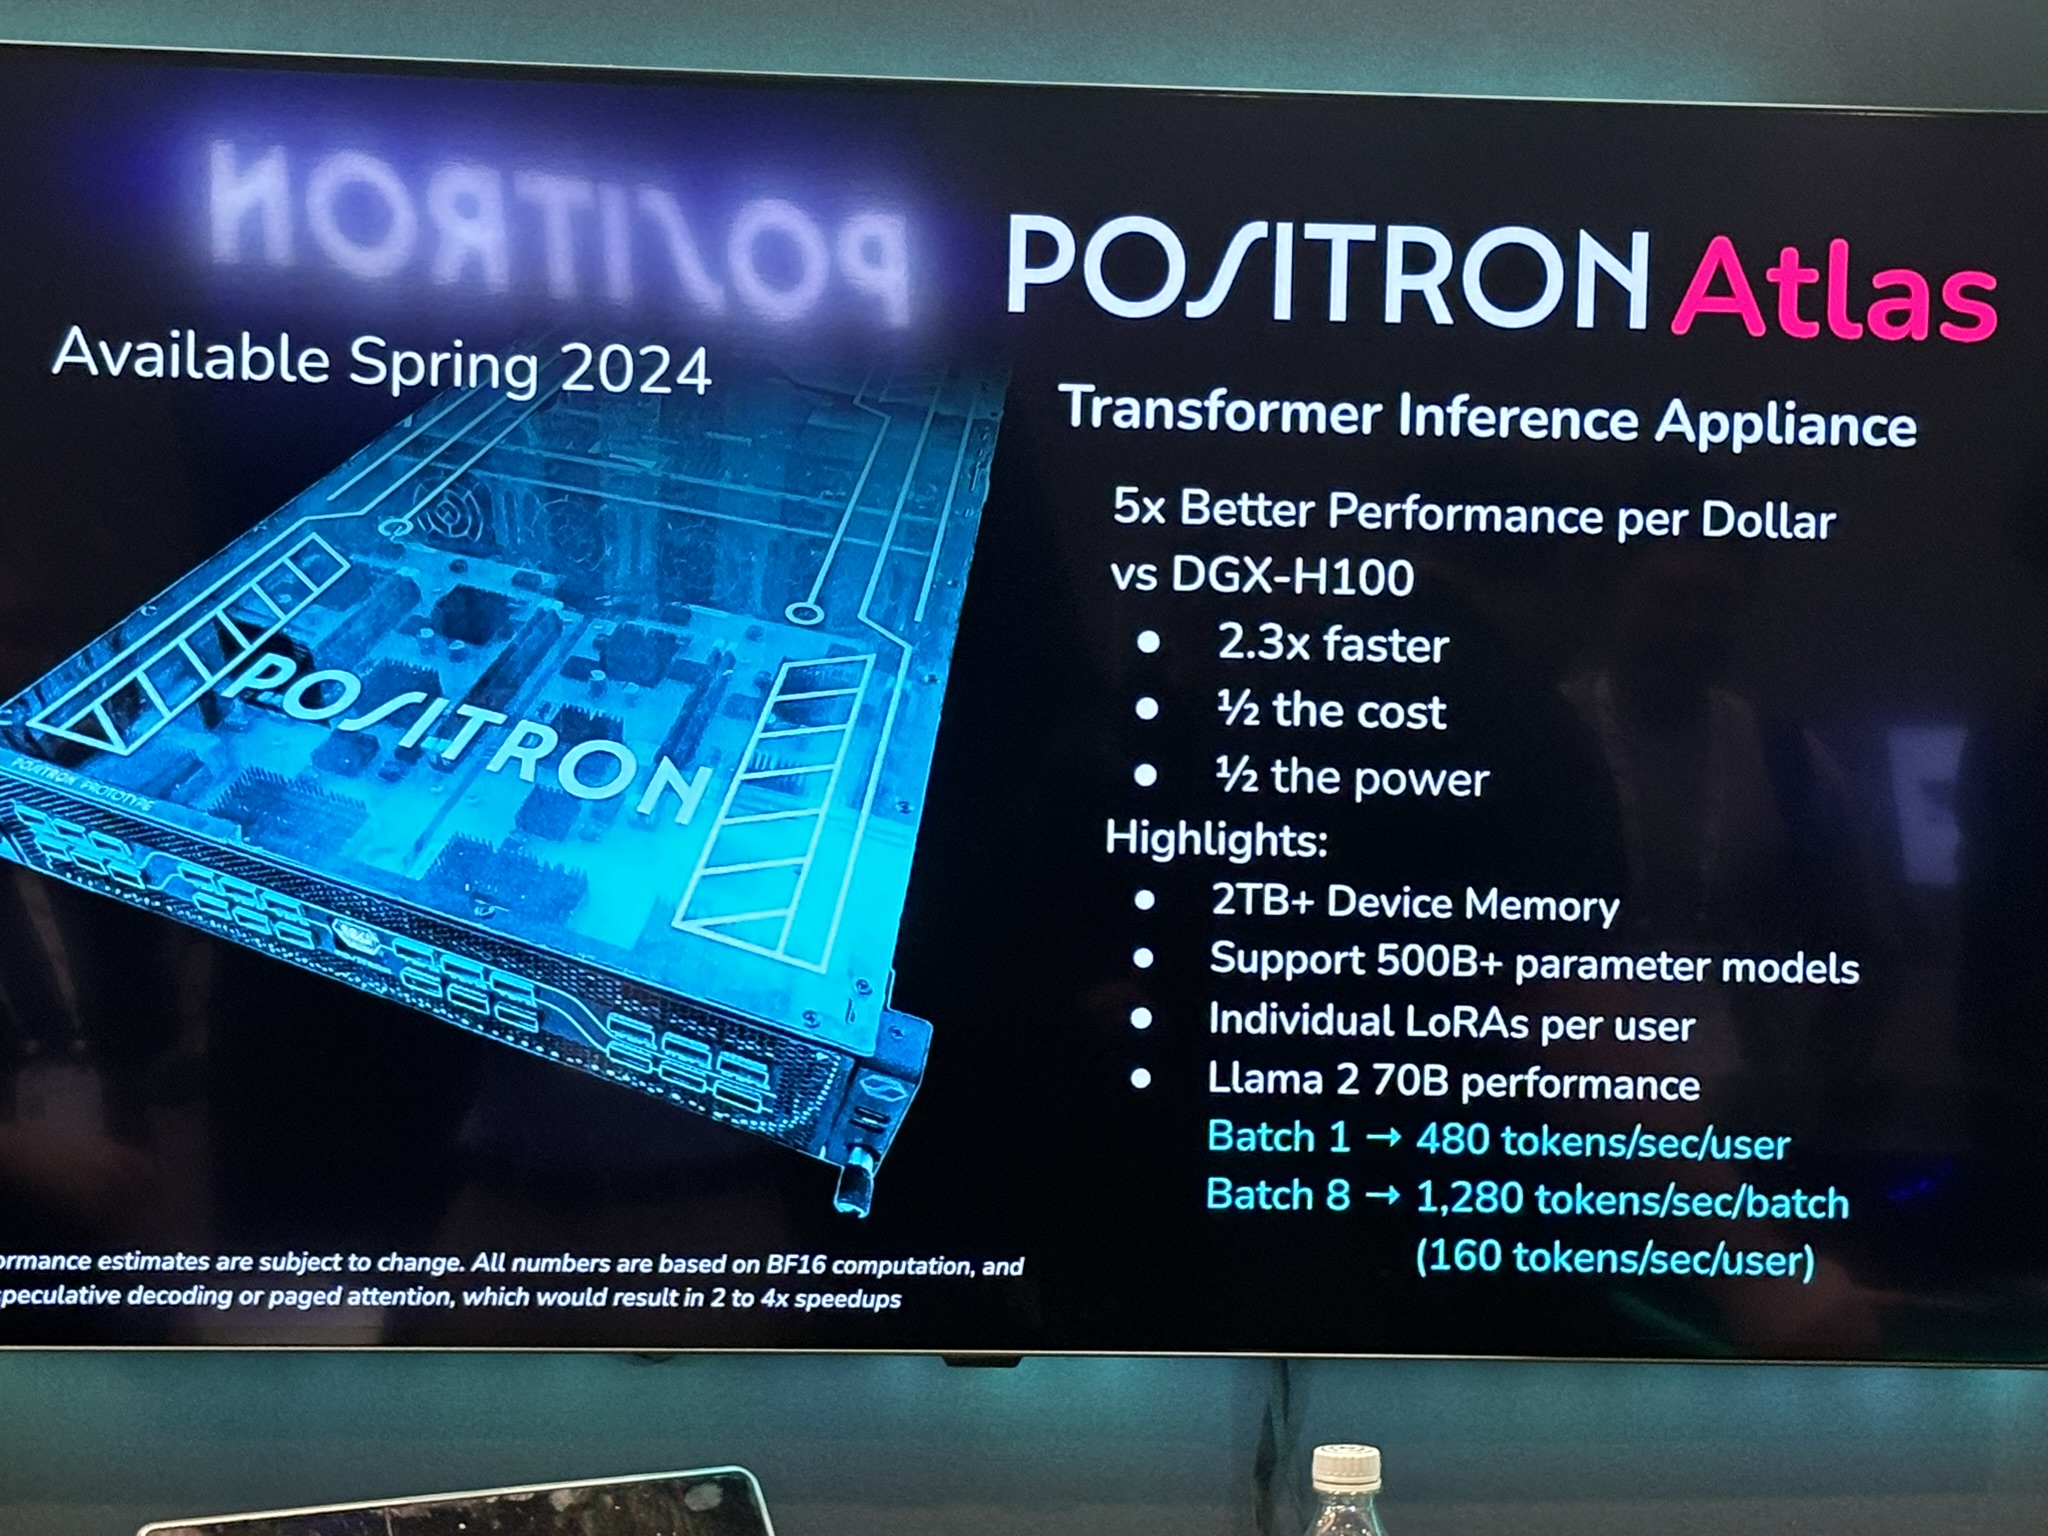 Positron Atlas: Transformer Inference Appliance, Available Spring 2024